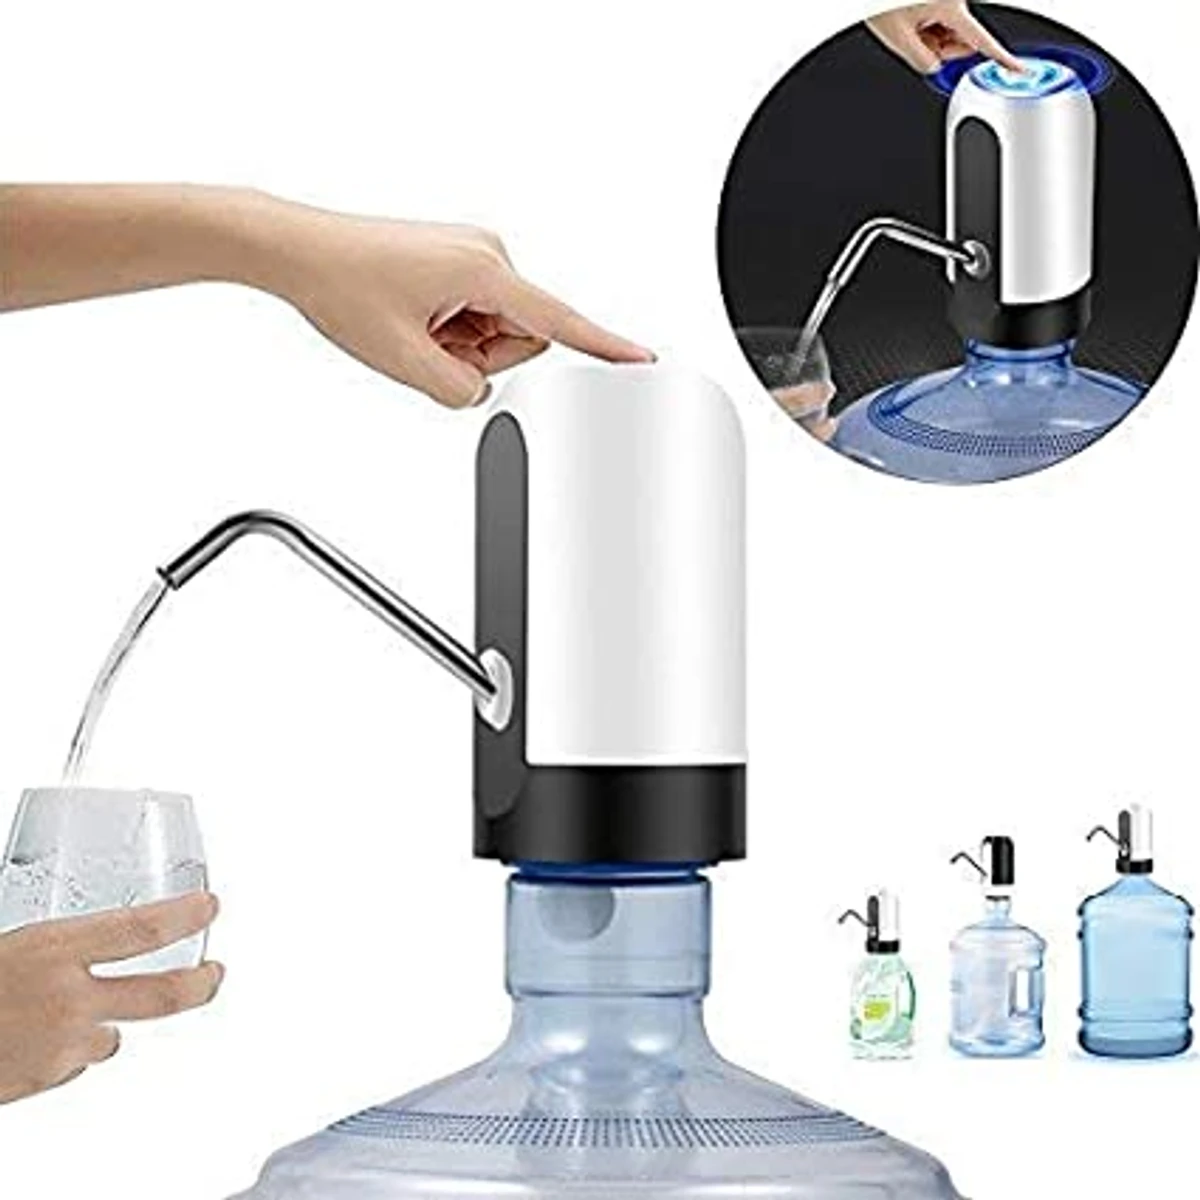 Automatic Water Dispenser USB Charging Electric Water Pump